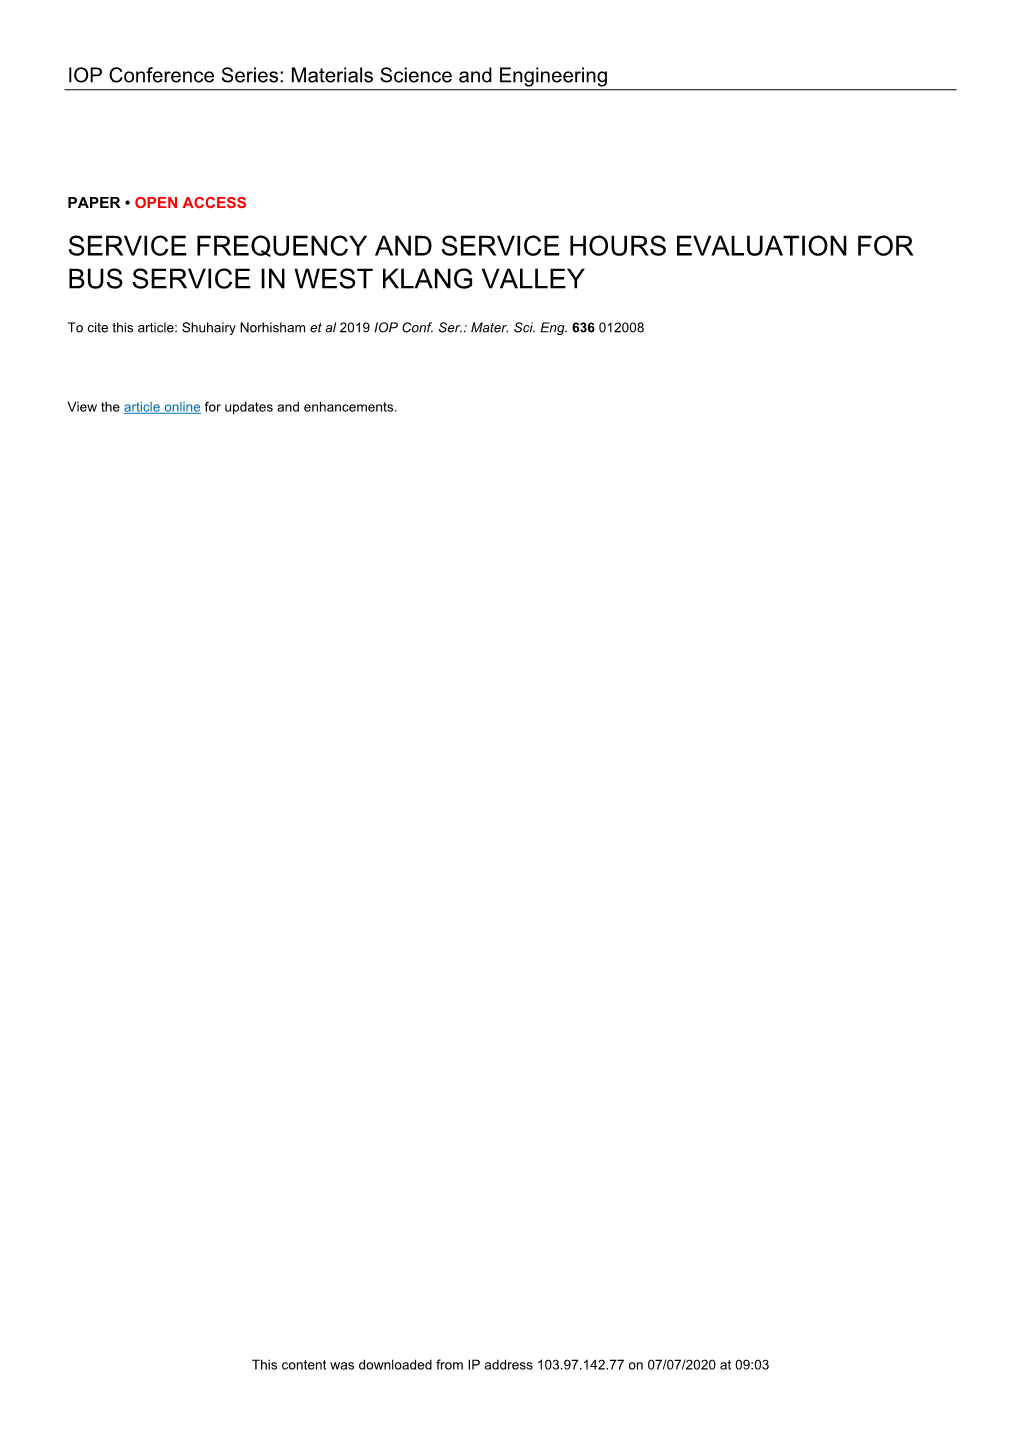 Service Frequency and Service Hours Evaluation for Bus Service in West Klang Valley